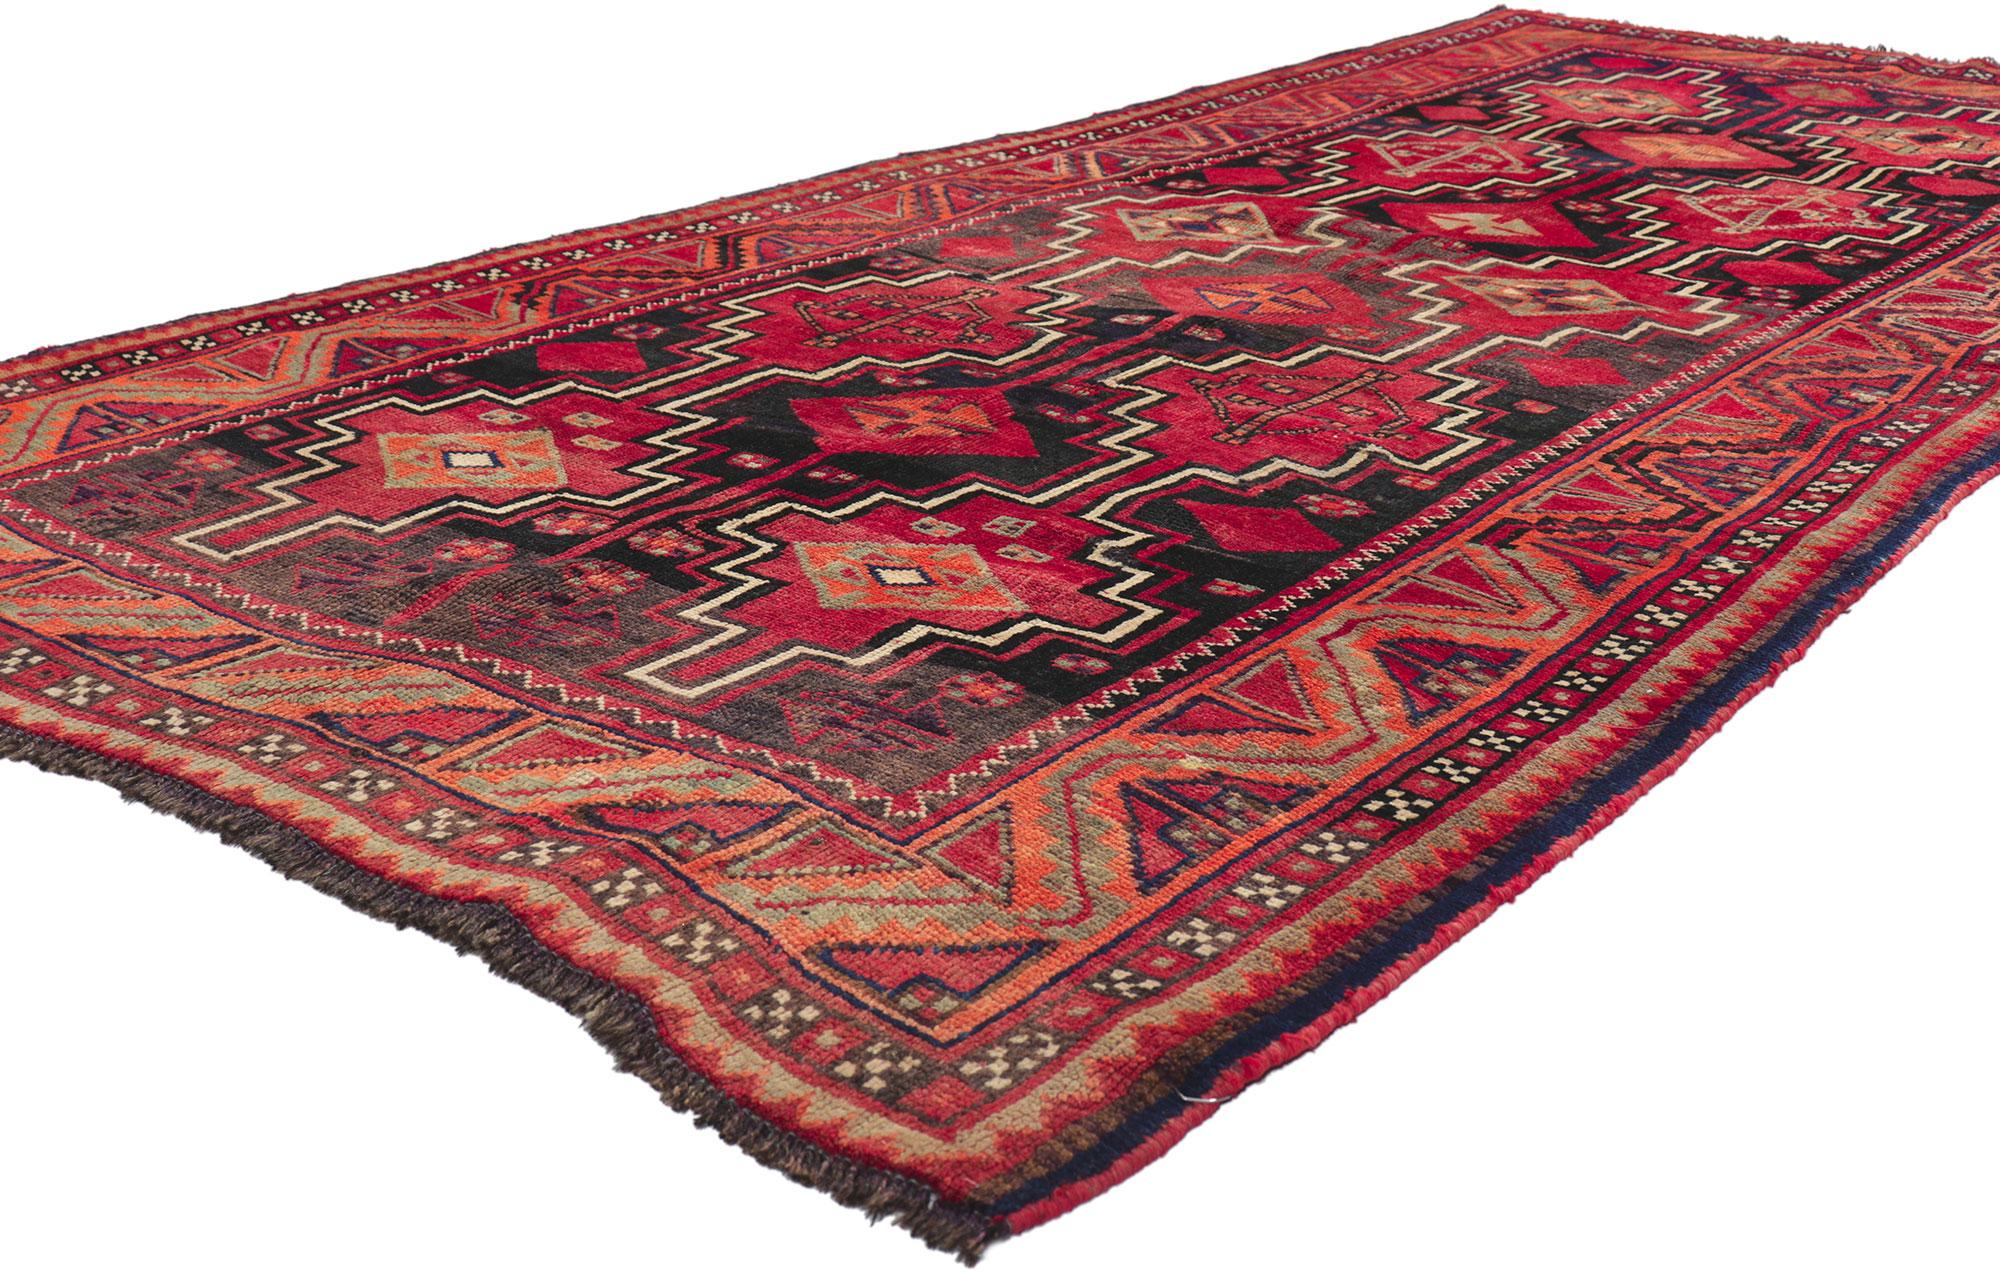 61221 Vintage Persian Shiraz Rug, 04.05 x 09.03.
Full of tiny details and nomadic charm, this hand knotted wool vintage Persian Shiraz rug is a captivating vision of woven beauty. The eye-catching tribal design and lively colorway woven into this